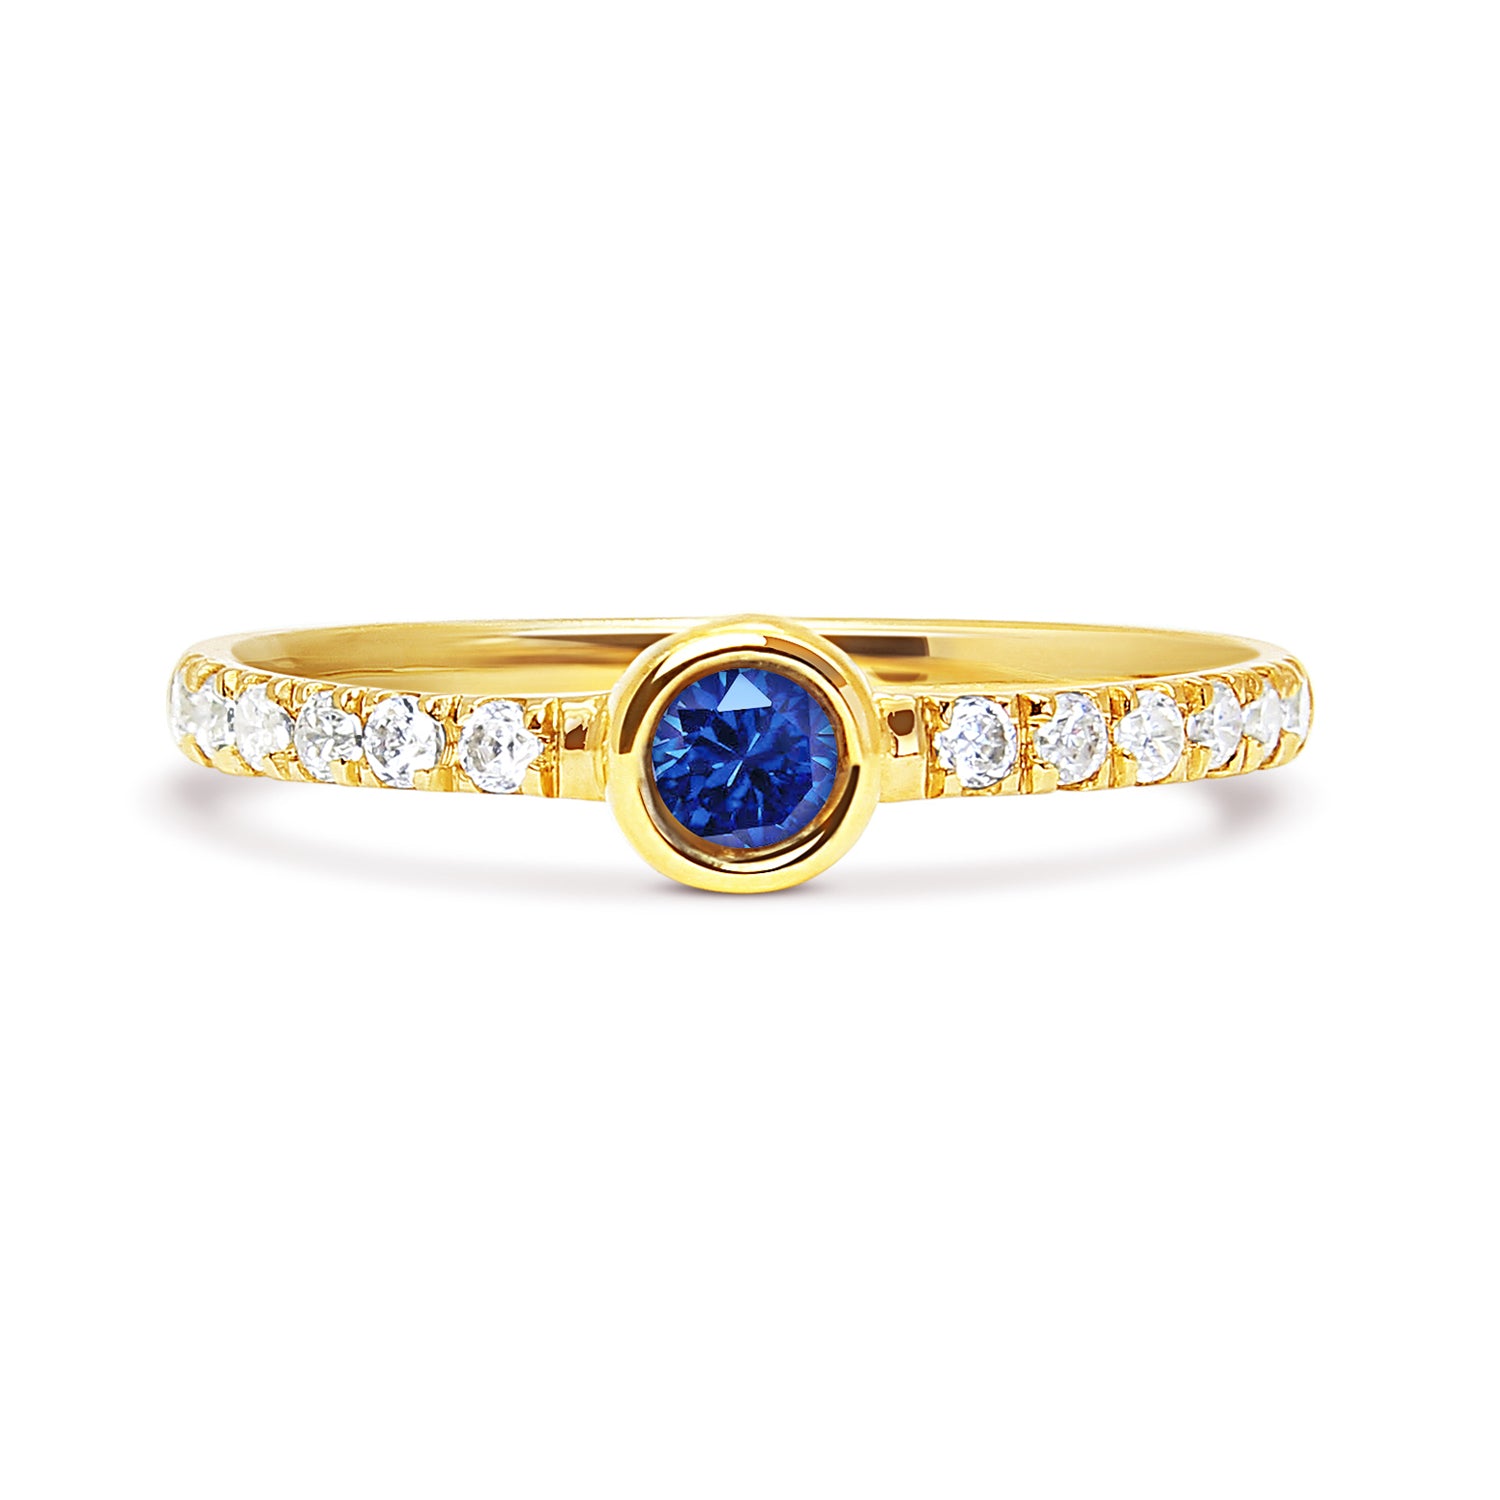 Hera Peacock Ethical Diamond Engagement Ring, 18ct Ethical Gold